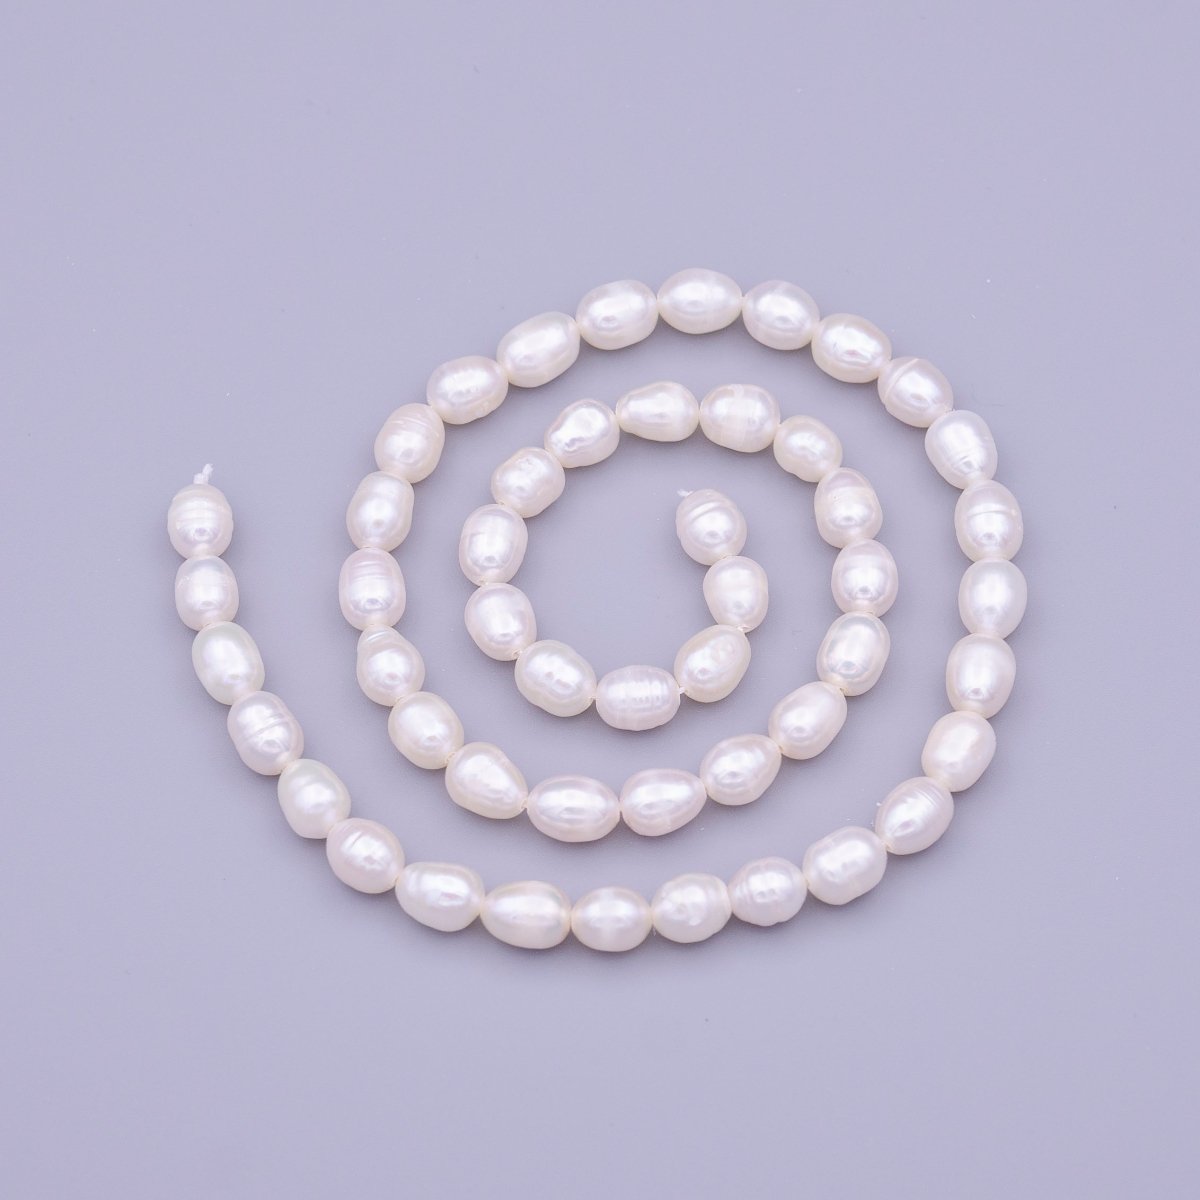 5.5mm AAA Natural White Freshwater Pearls Beads 51pcs Full Strand | WA-1325 Clearance Pricing - DLUXCA